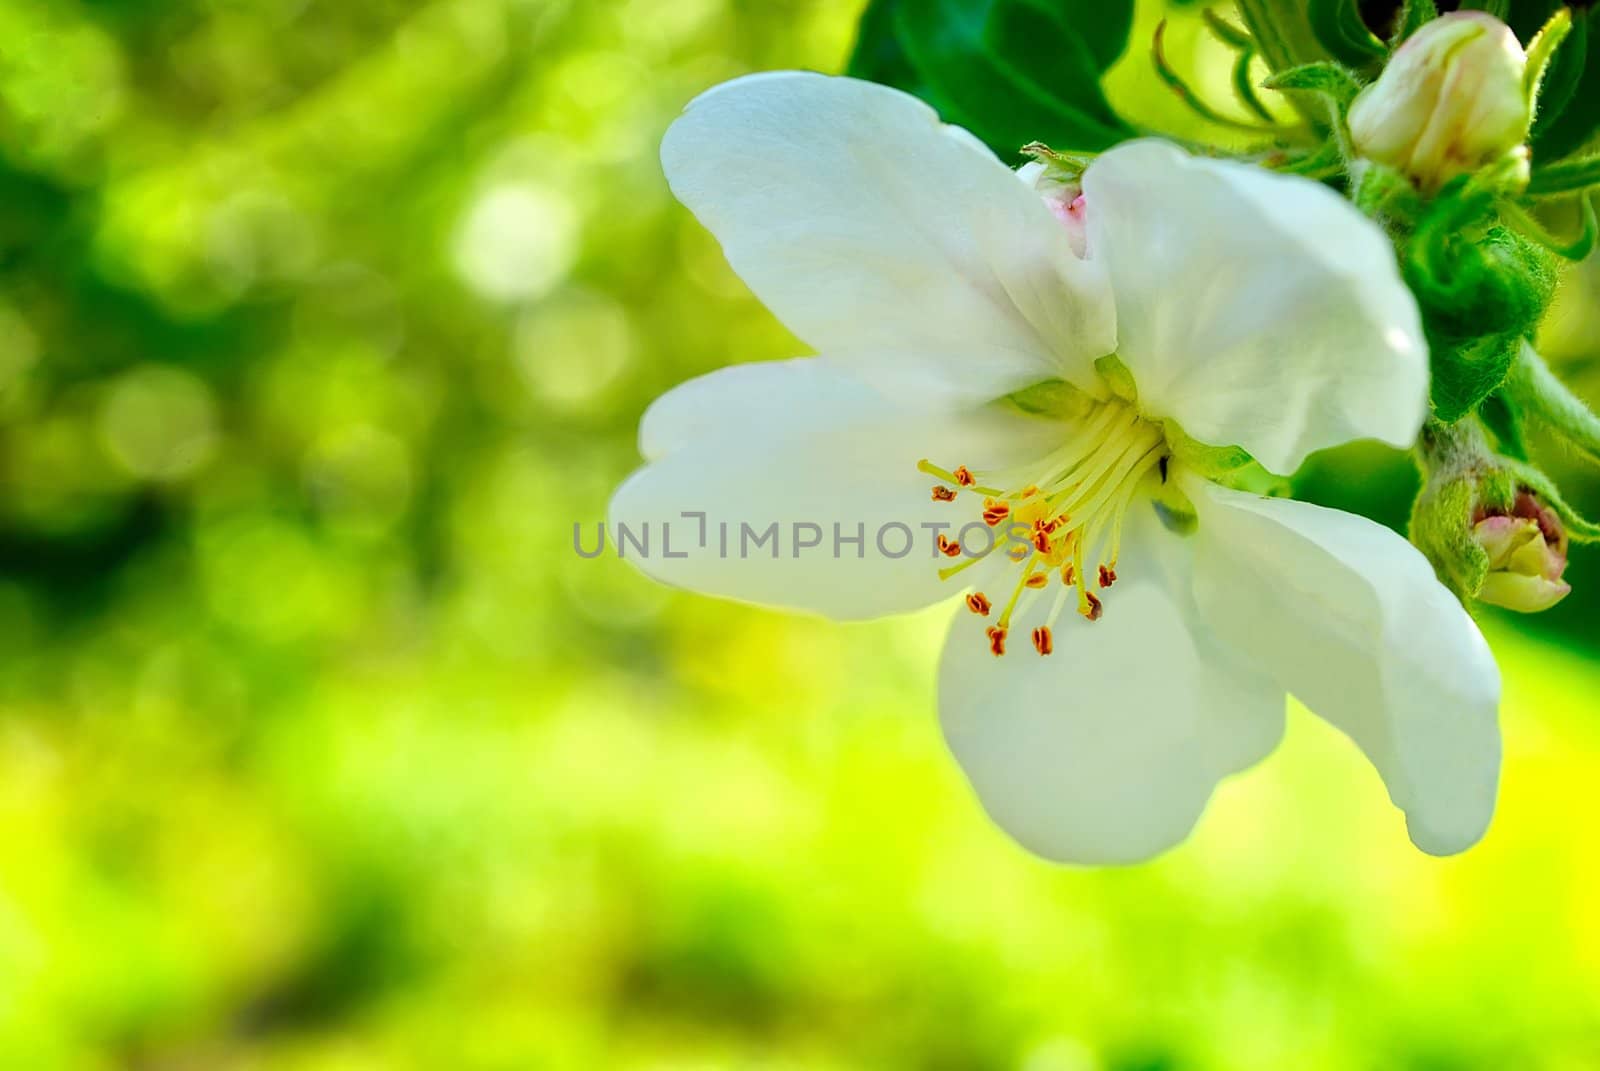 One apple trees flower on a green background